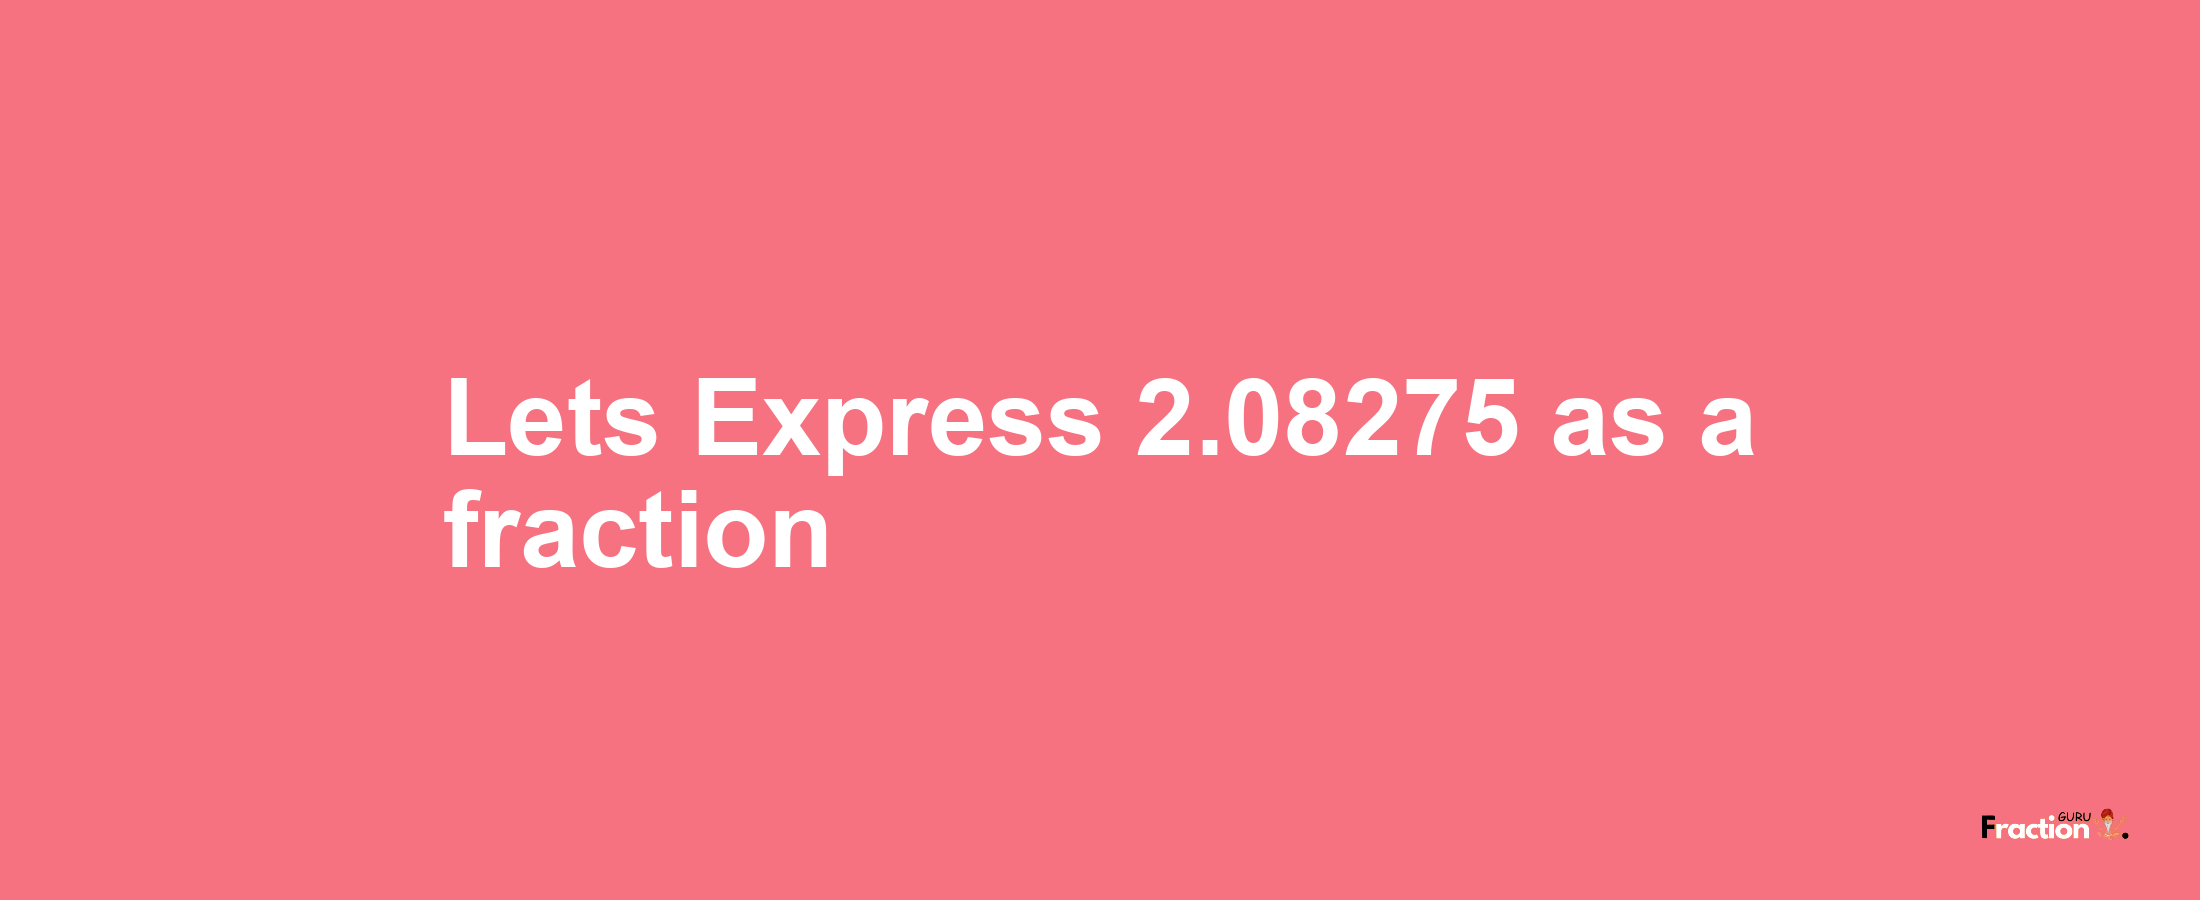 Lets Express 2.08275 as afraction